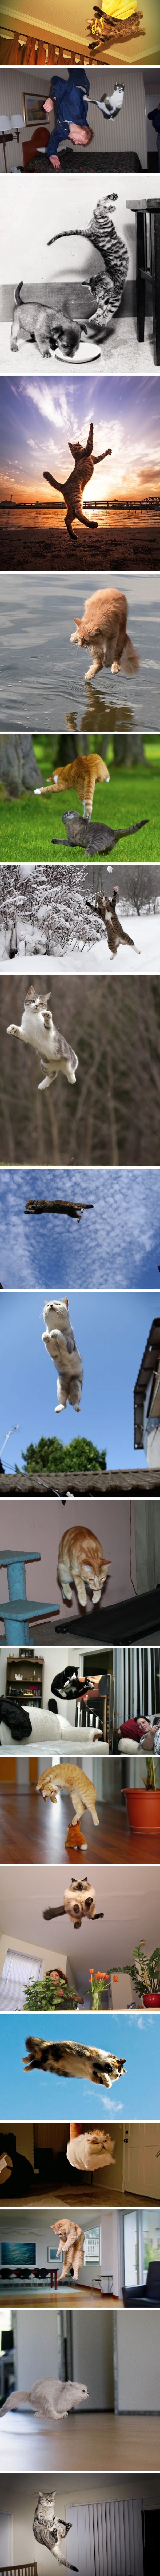 Hover cats